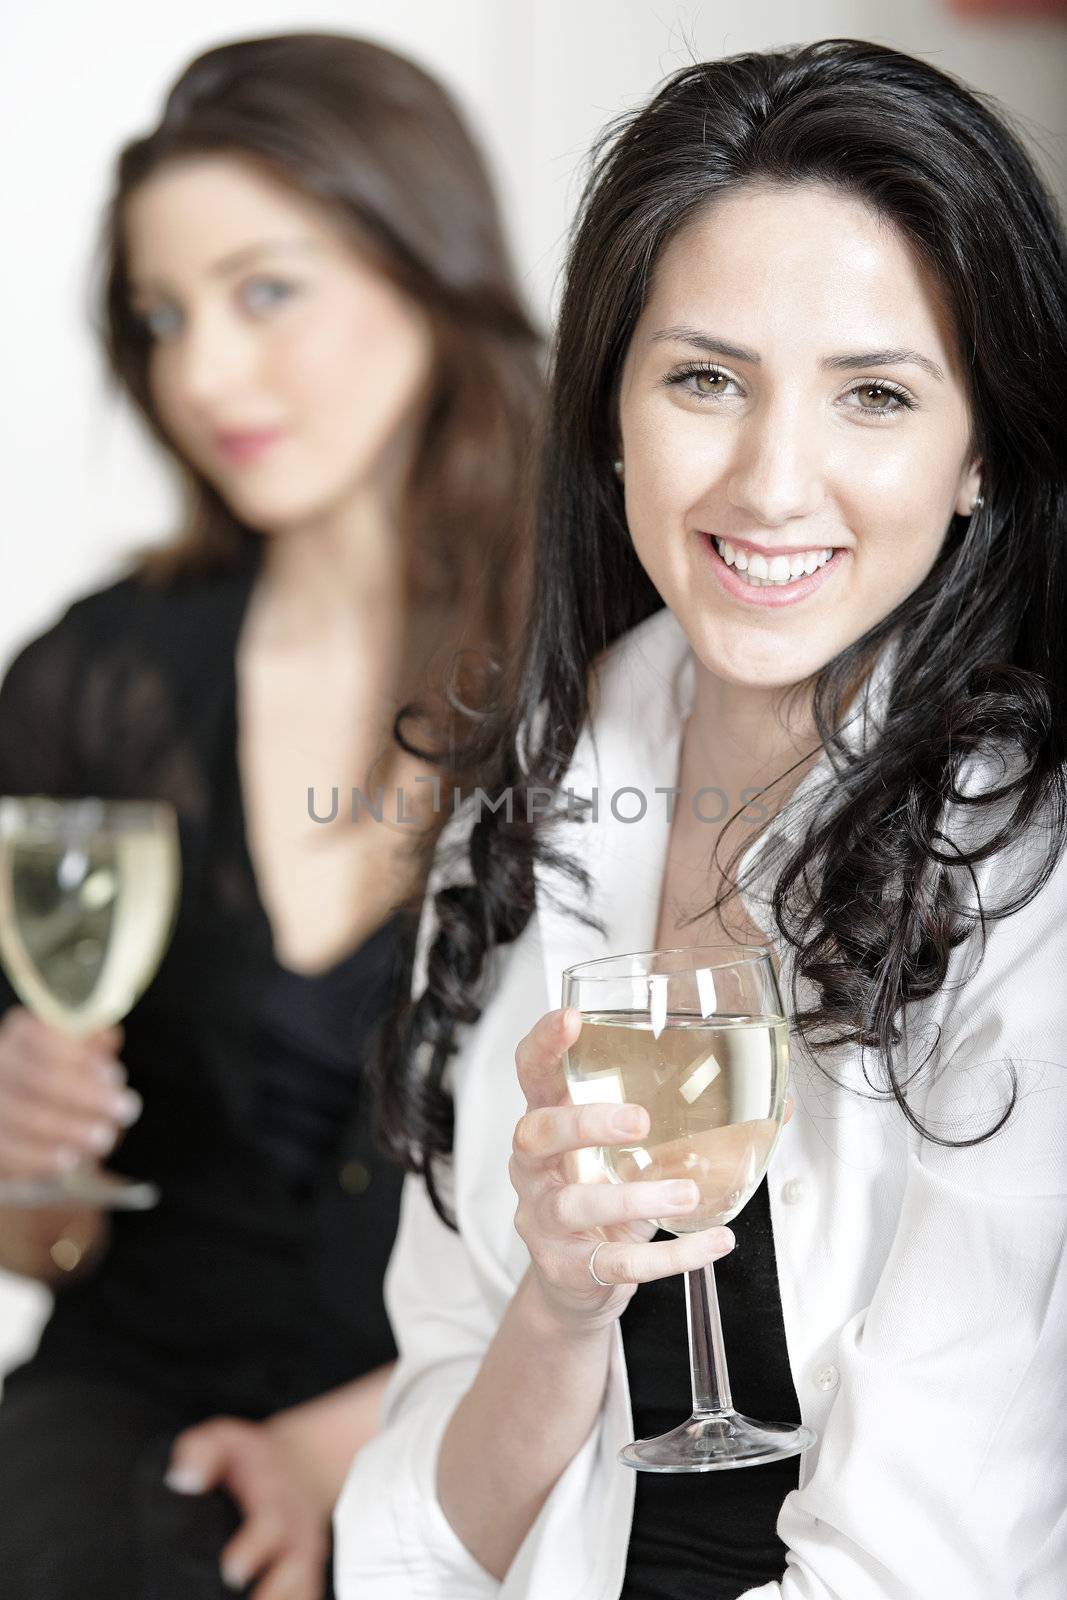 Two friends at a dinner party enjoying a glass of wine